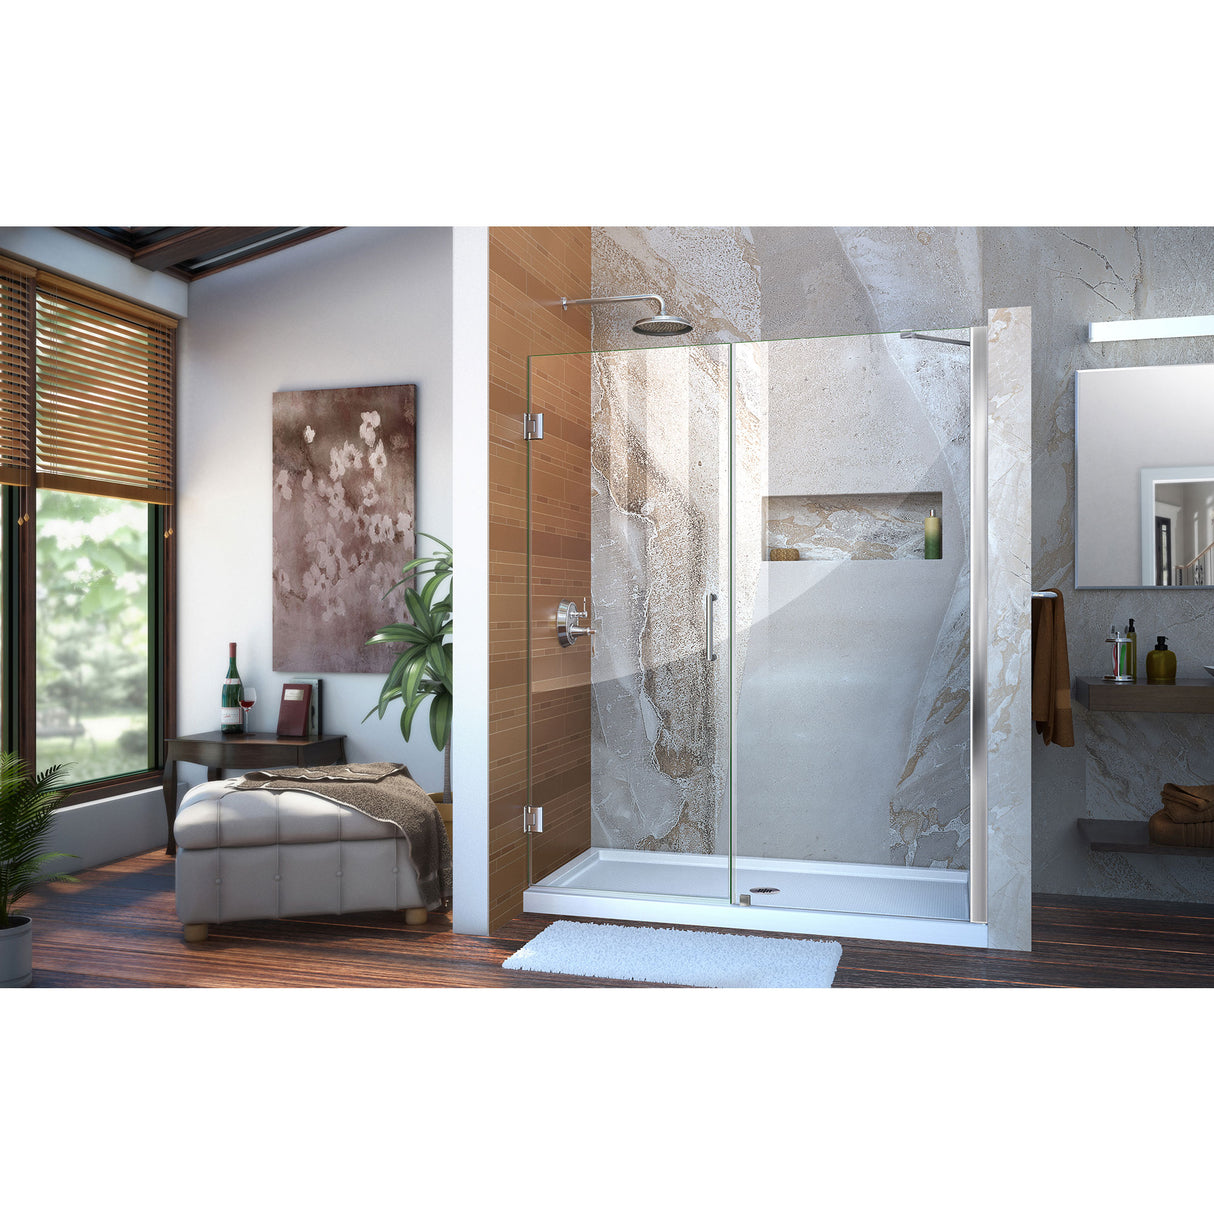 DreamLine Unidoor 53-54 in. W x 72 in. H Frameless Hinged Shower Door with Support Arm in Chrome